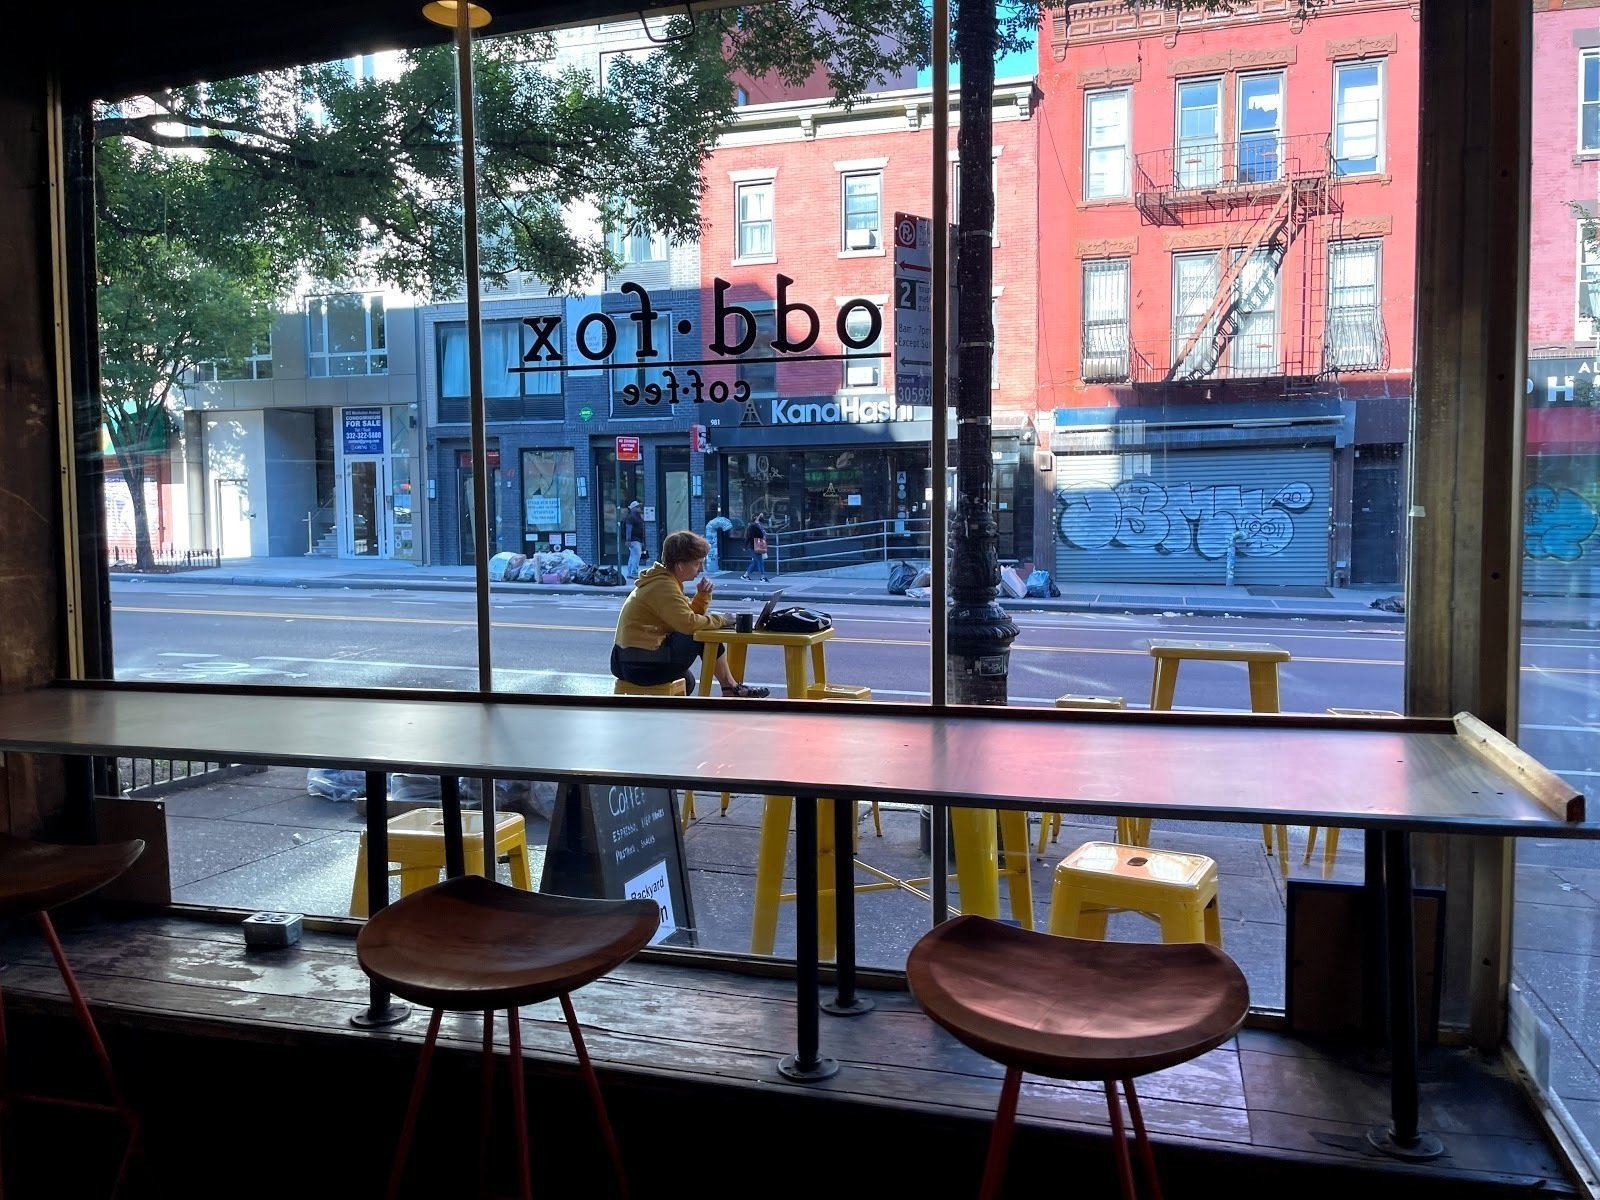 <span class="translation_missing" title="translation missing: en.meta.location_title, location_name: Odd Fox Coffee, city: New York">Location Title</span>